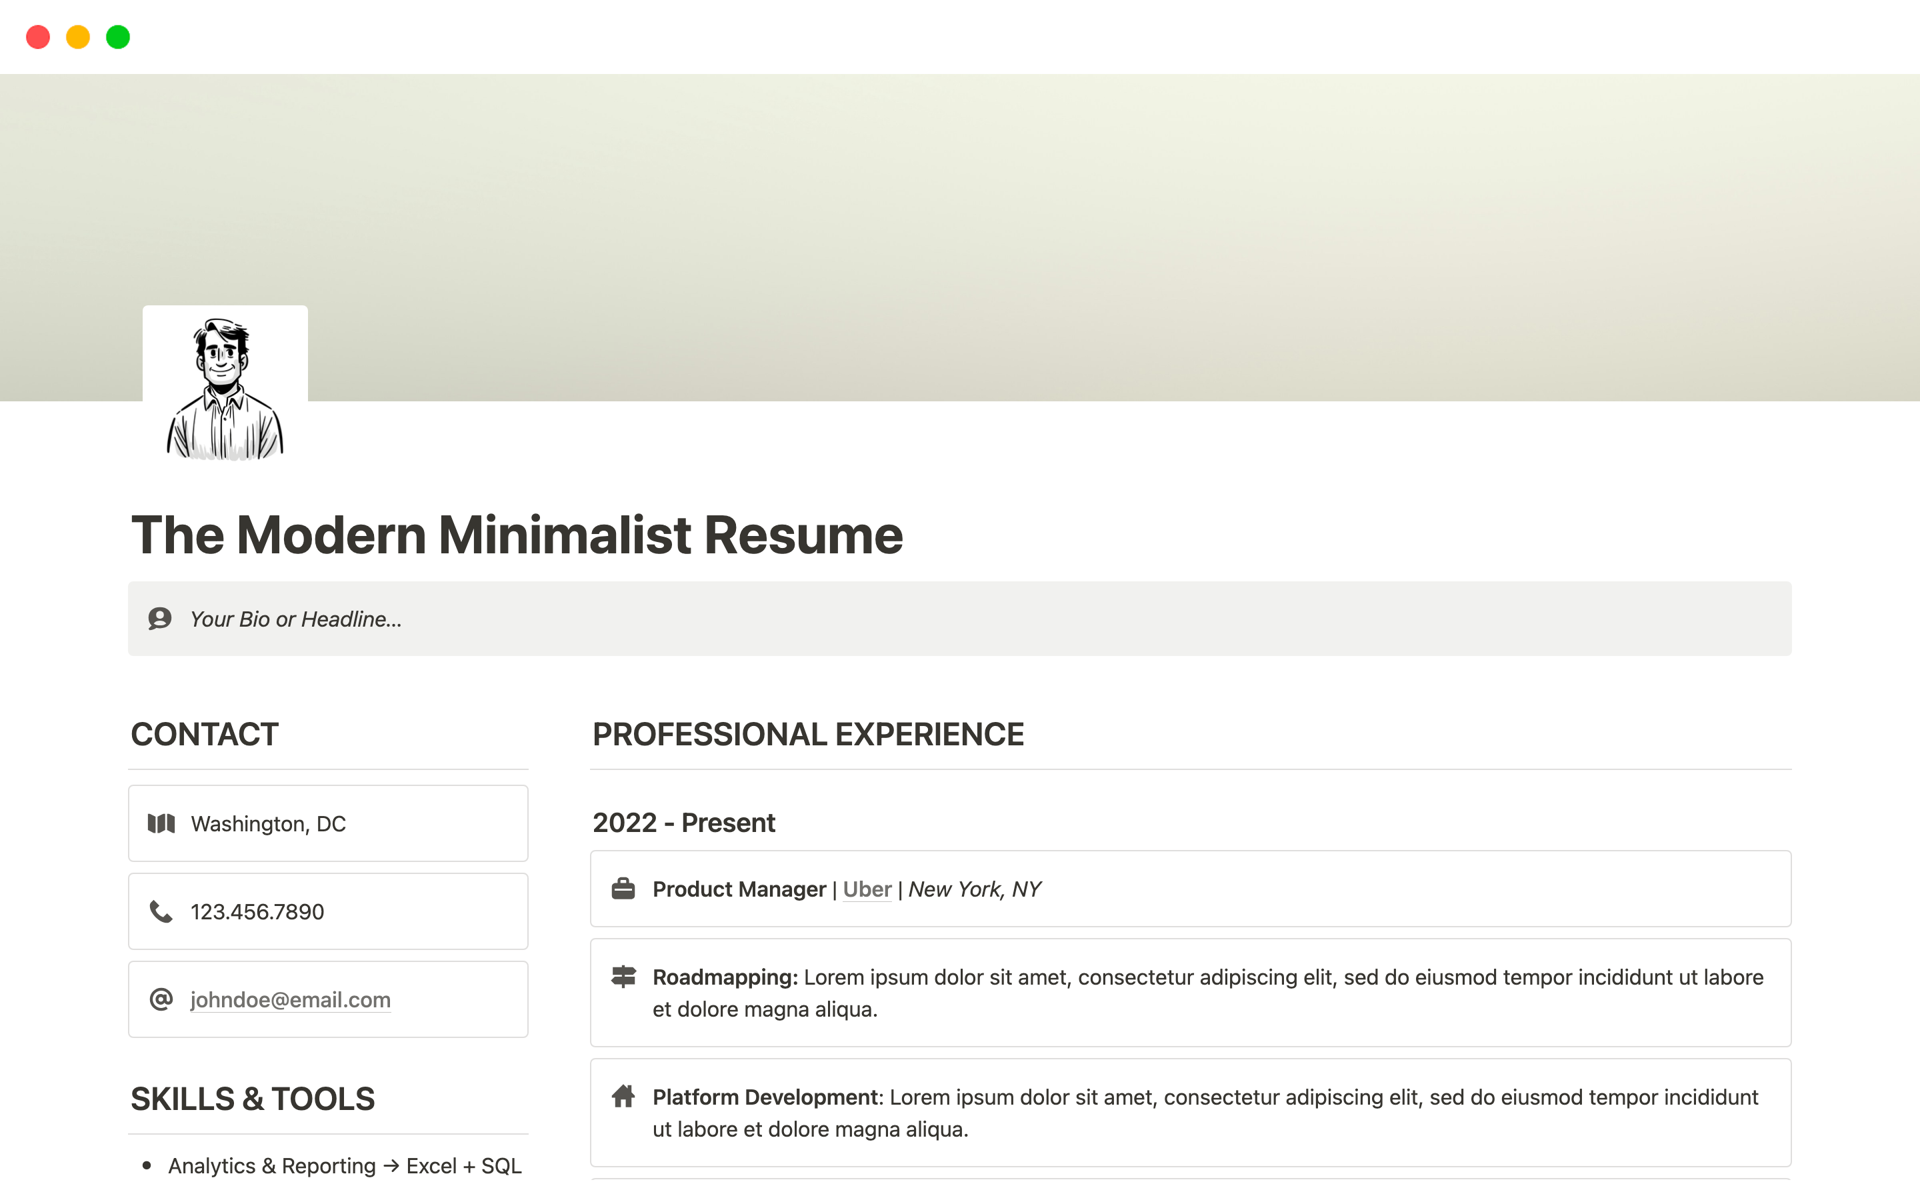 The Modern Minimalist Resume: A sleek Notion template for professionals seeking an understated yet sophisticated way to showcase their career journey.